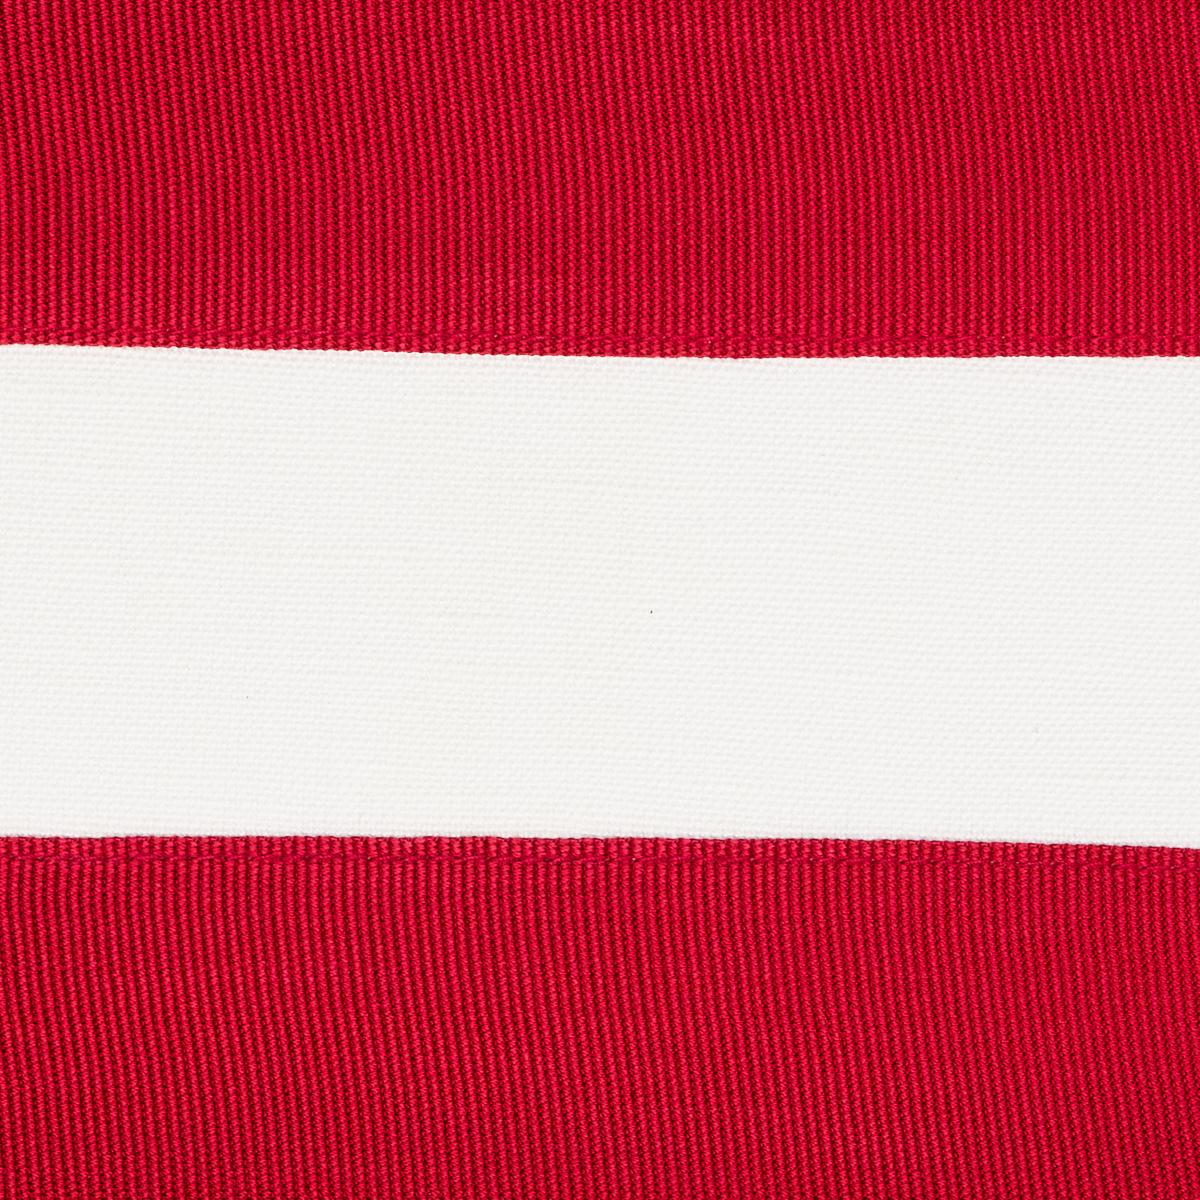 RIBBON APPLIQUÉ PANEL_RED ON IVORY